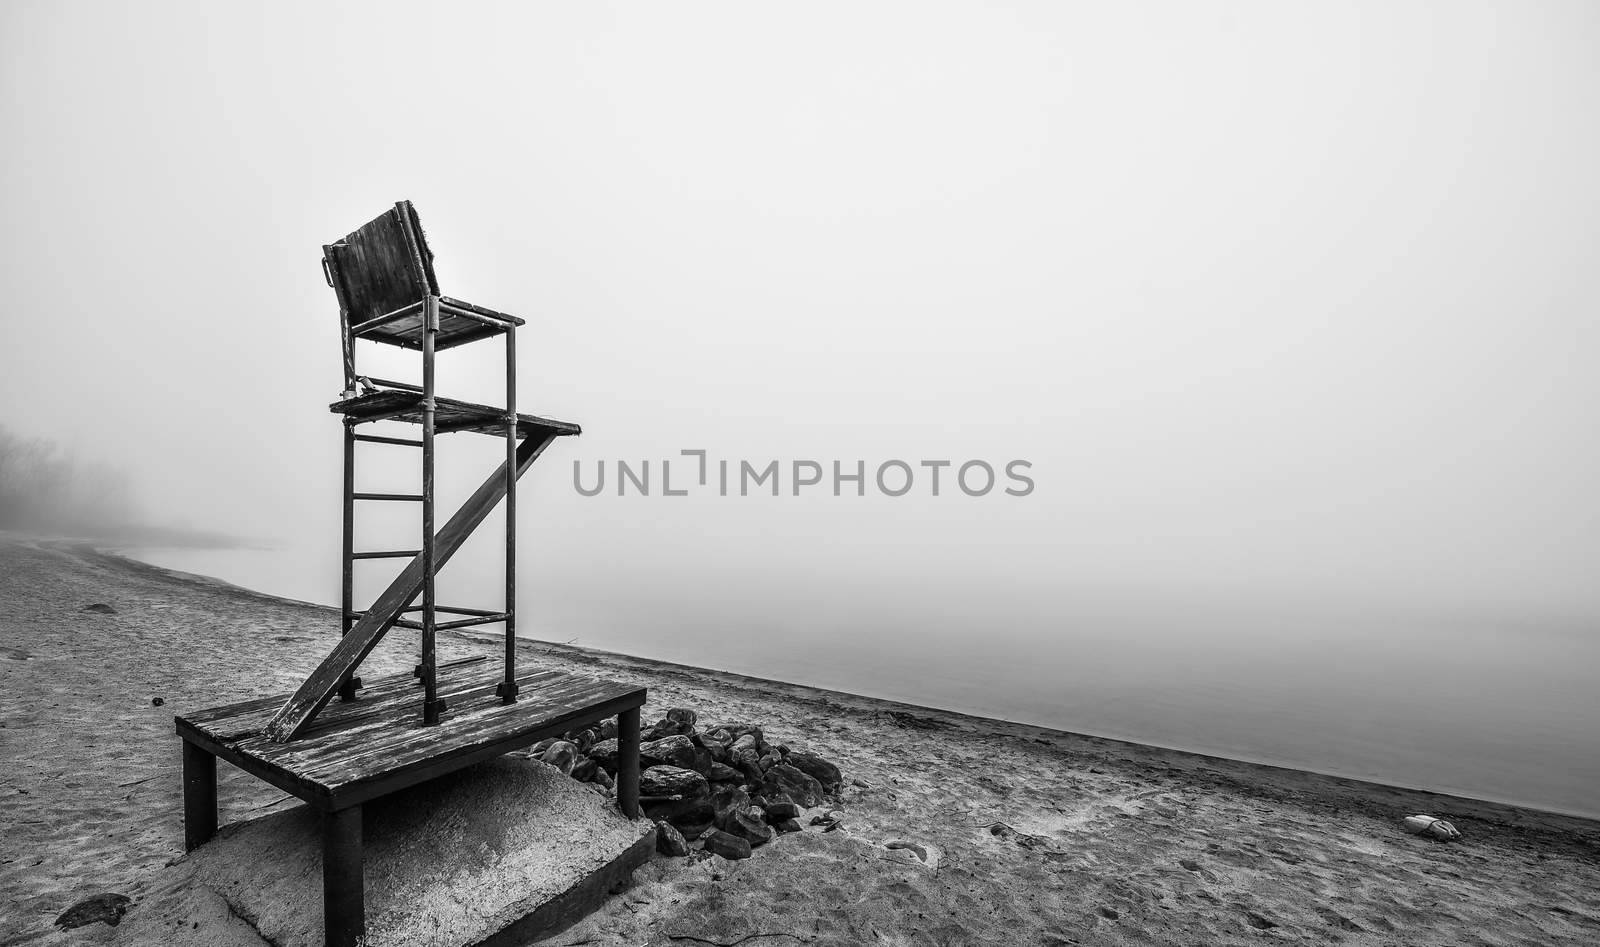 Empty lifeguard chair on morning foggy beach. by valleyboi63